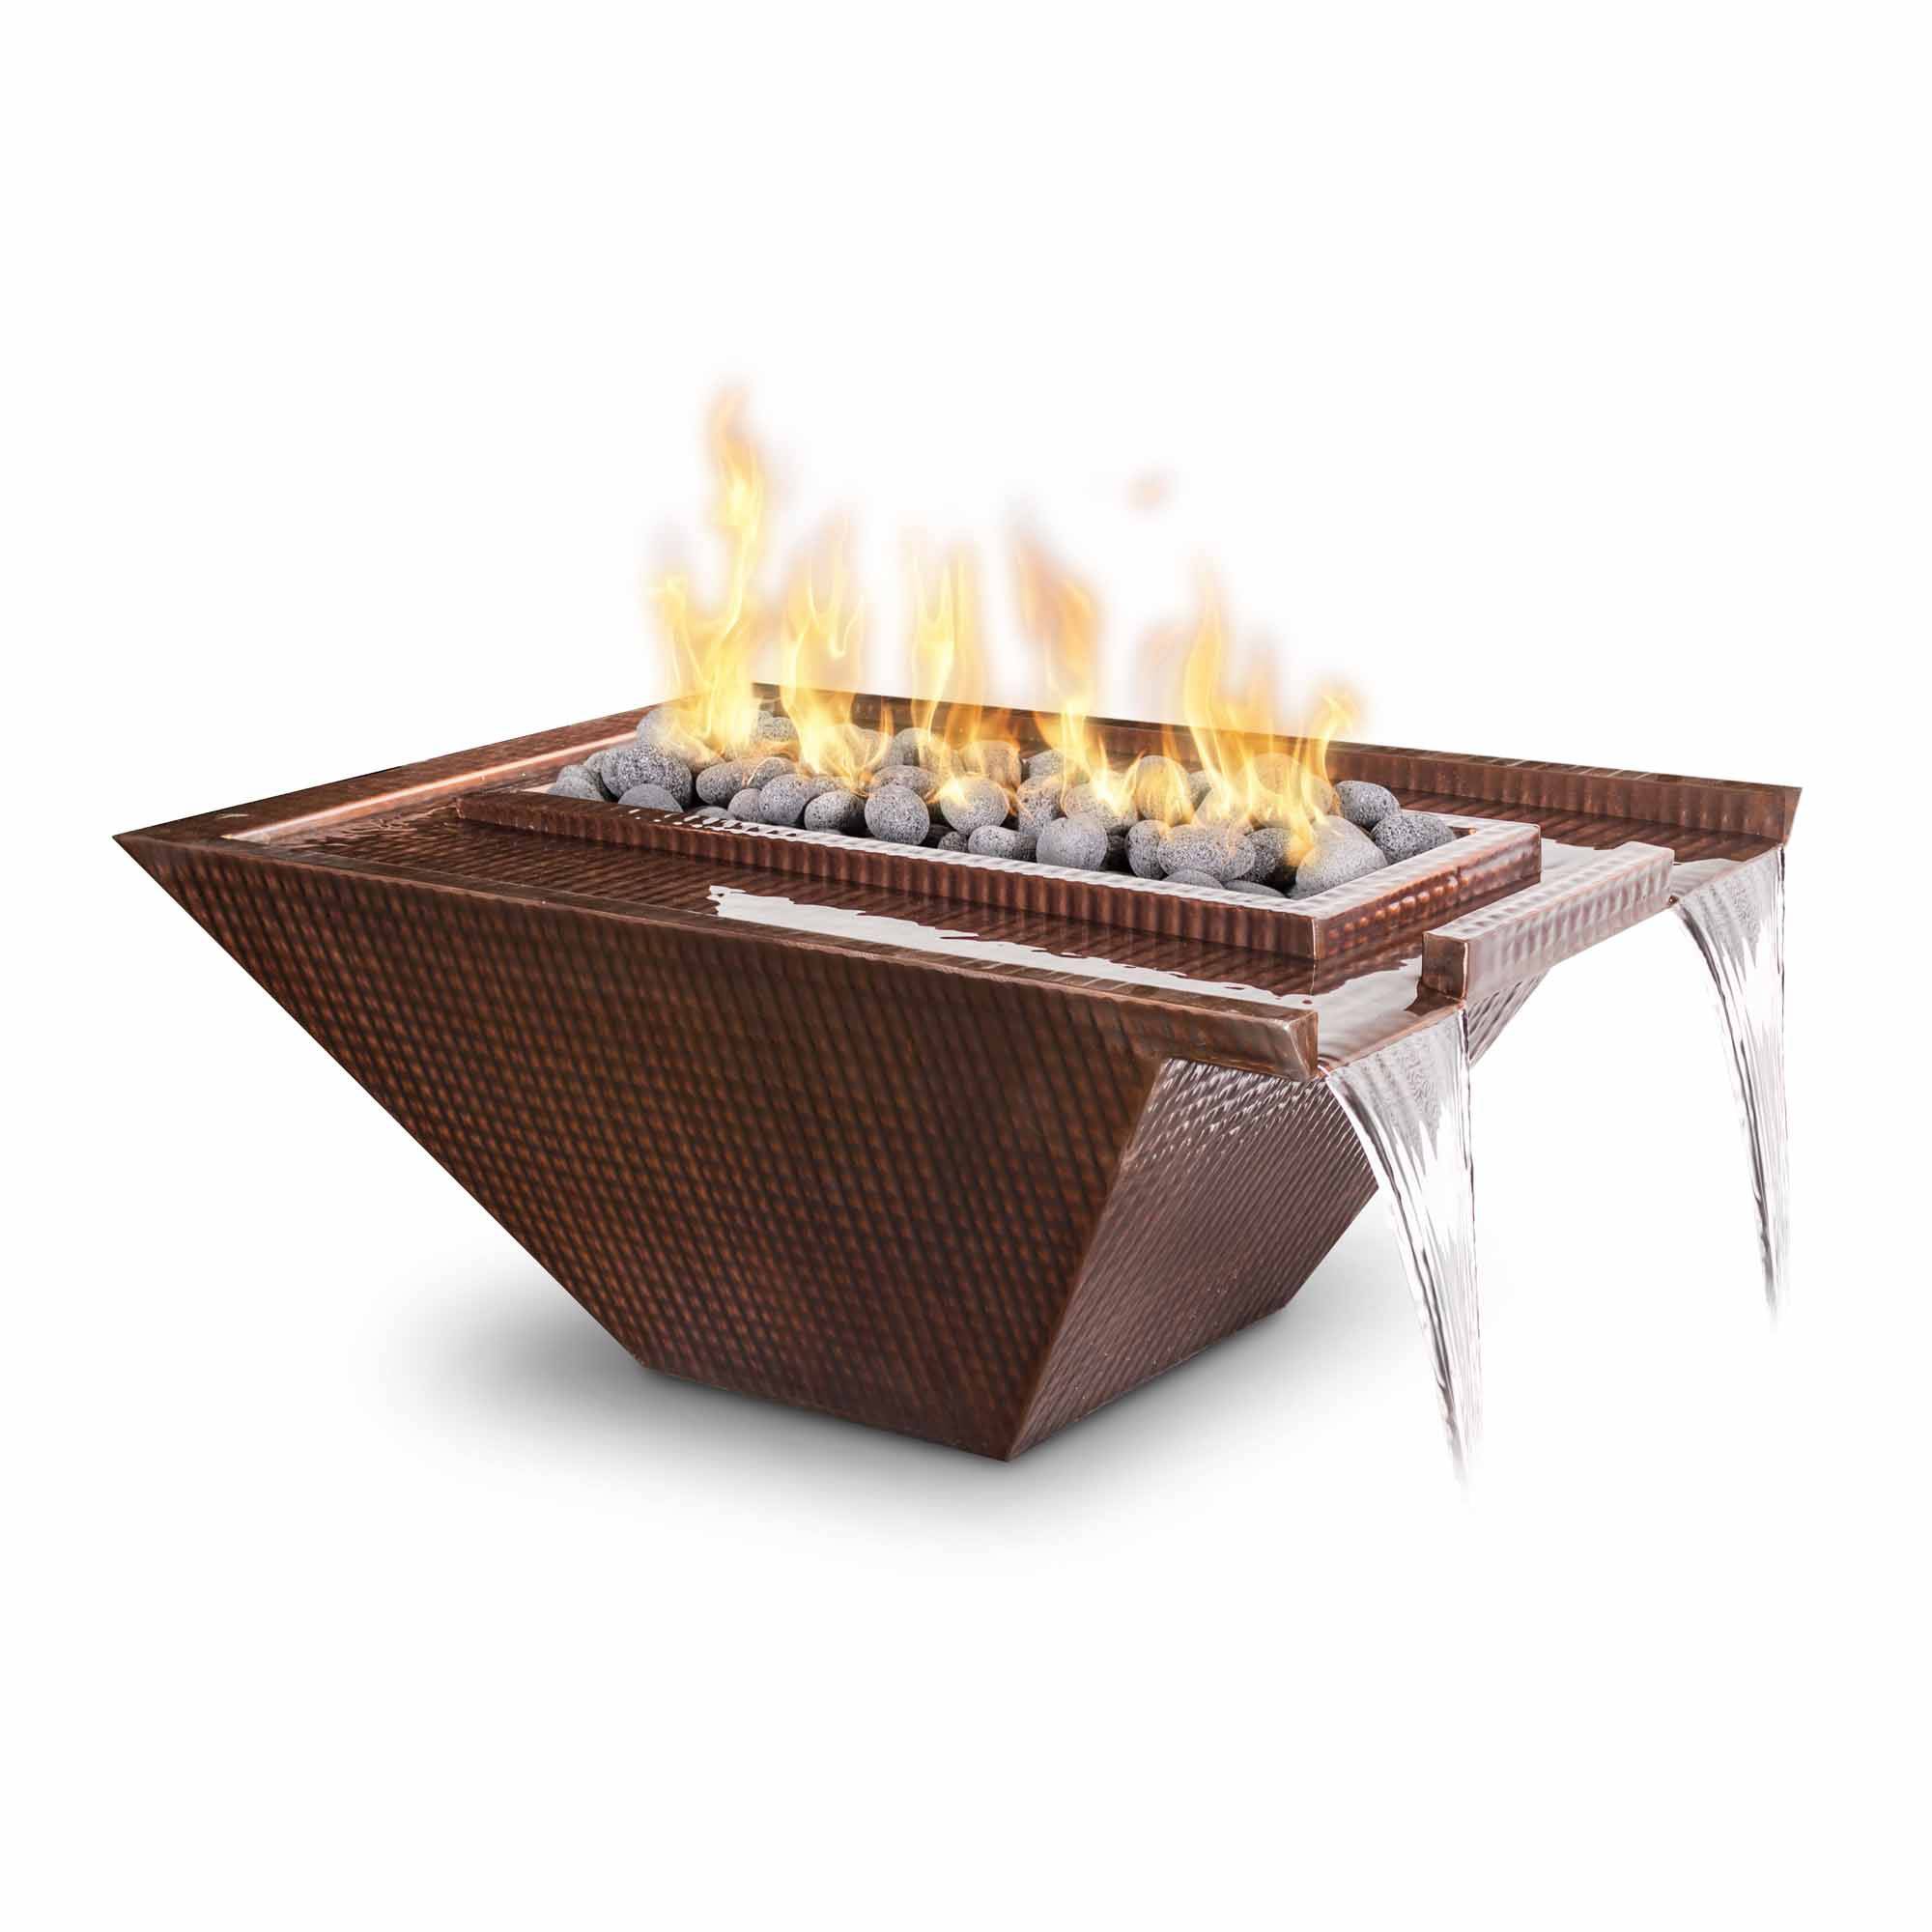 The Outdoor Plus Nile Fire & Water Bowl Hammered Patina Copper OPT-36NLCPF - Serenity Provision